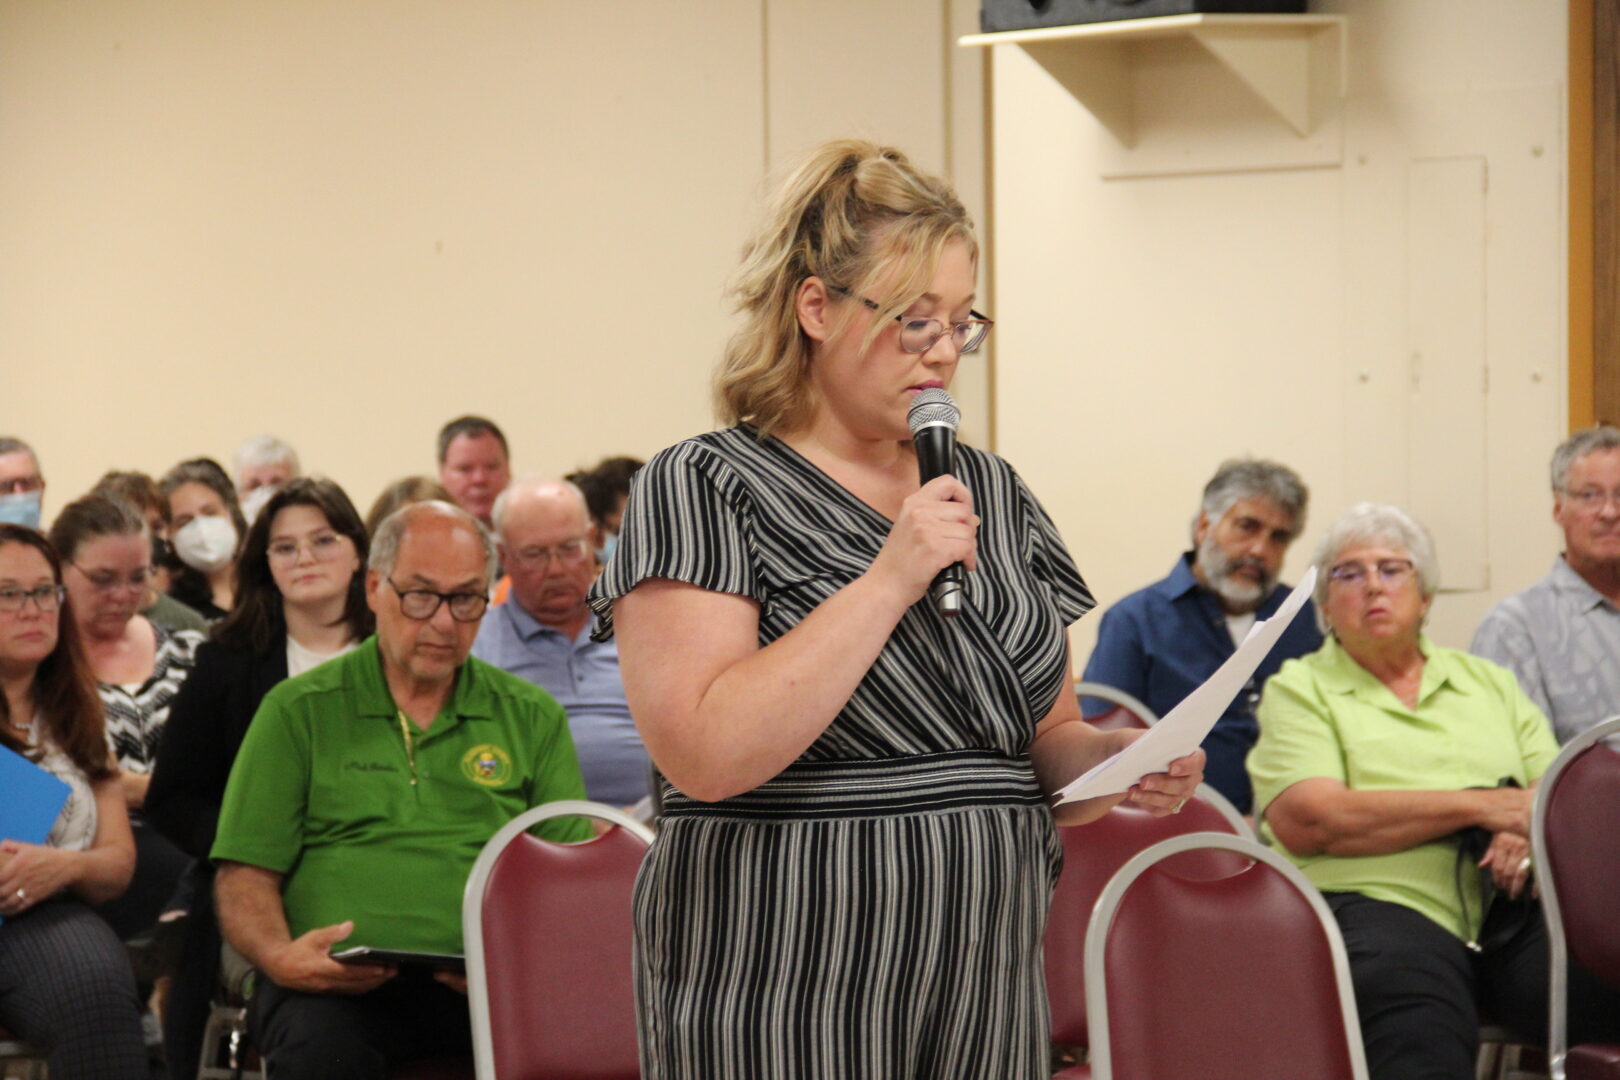 Katie Sheehan testifies at an EPA hearing in Plum, Pa. against the Sedat 4A injection well proposed by Penneco Environmental Resources, LLC on August 30, 2022. Photo: Reid R. Frazier